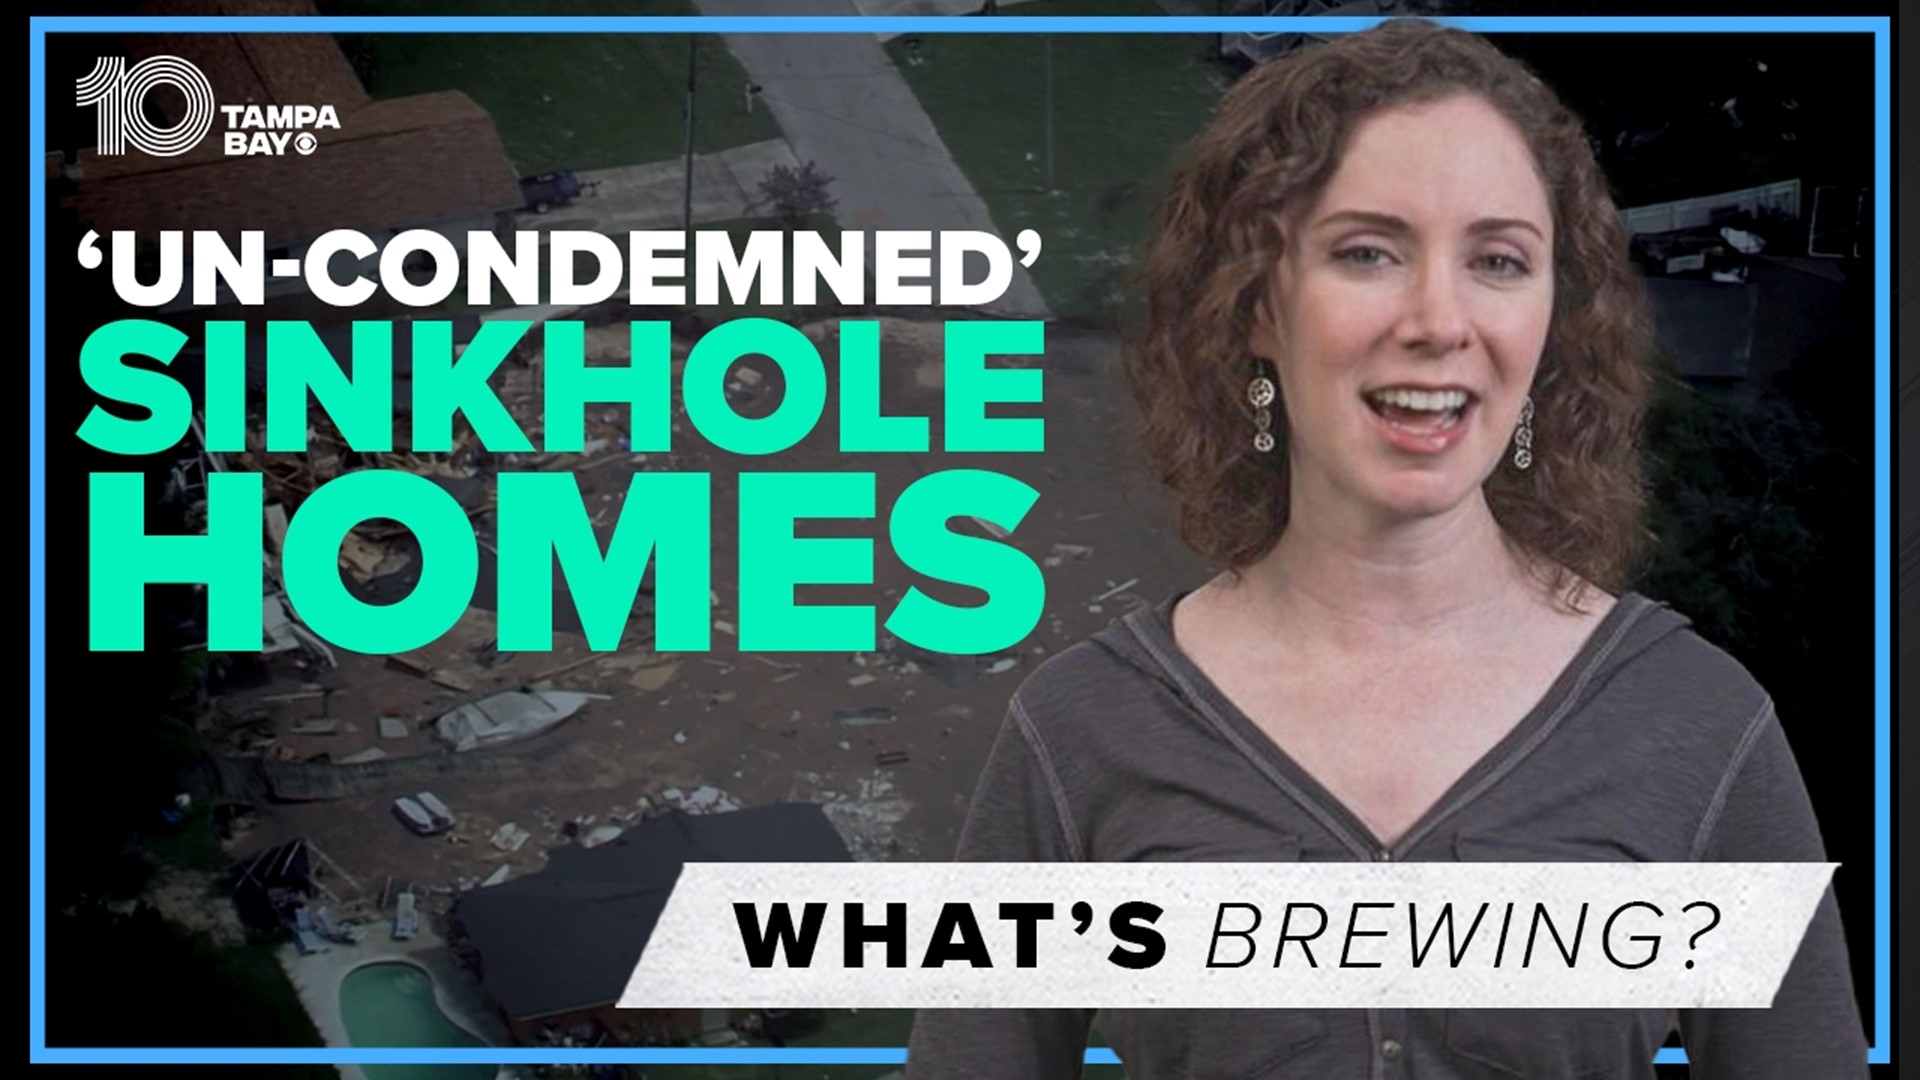 In this episode of What’s Brewing, investigative reporter Jenna Bourne found people living in some houses destined for demolition.